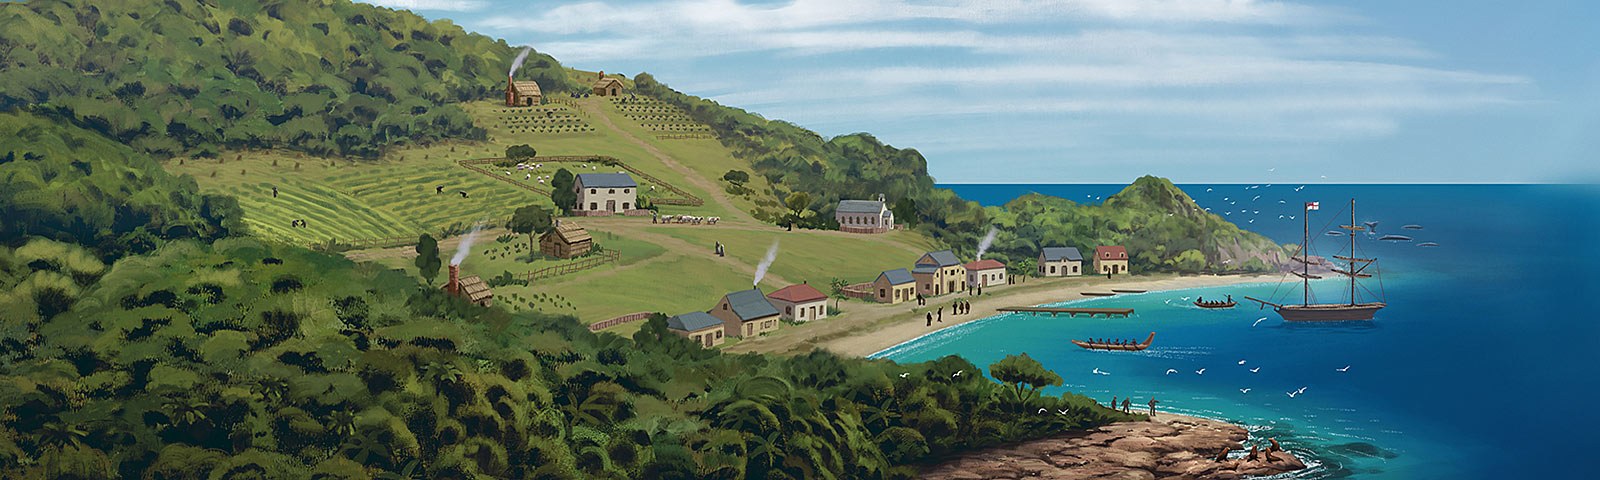 Colour artwork of a coastal European settlement by the coast, showing the houses and farms, and a sailing ship and waka in the bay.